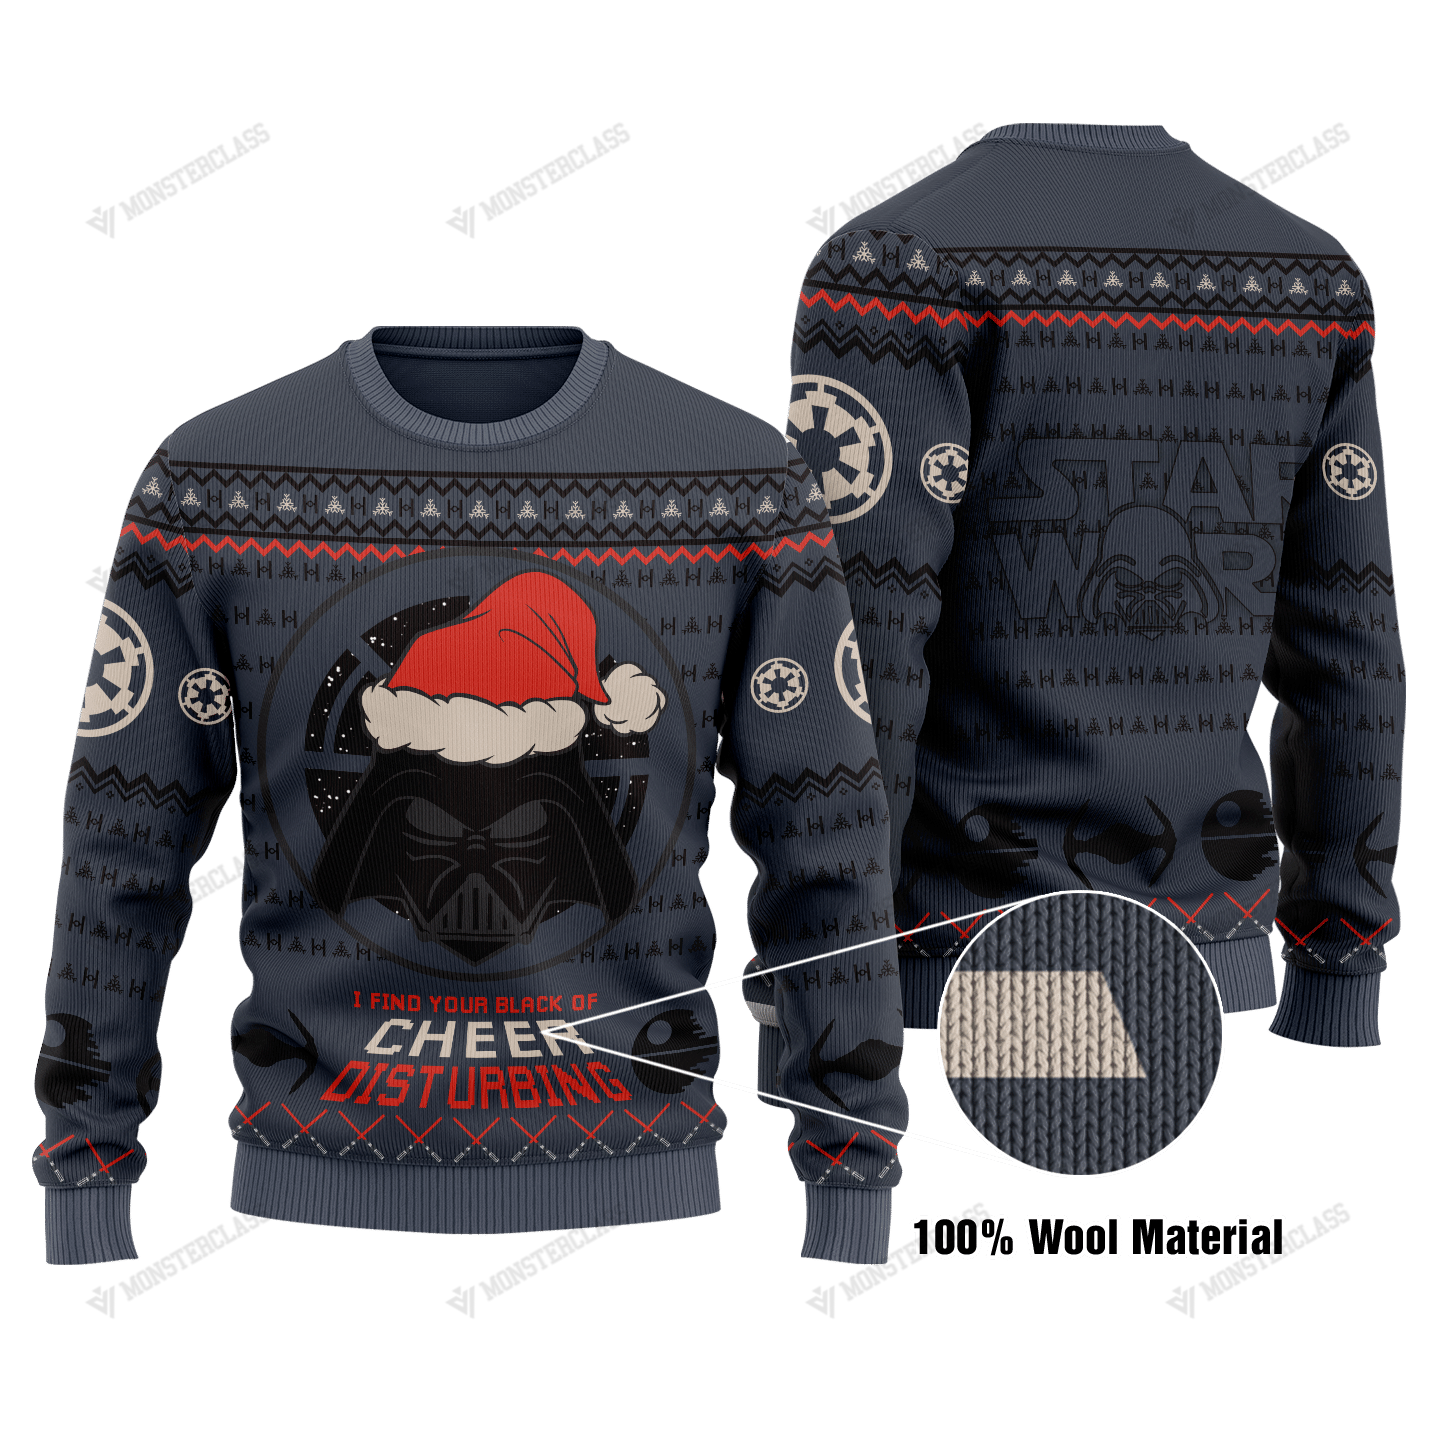 Star Wars Darth Vader I Find Your Lack Of Cheer Disturbing christmas sweater